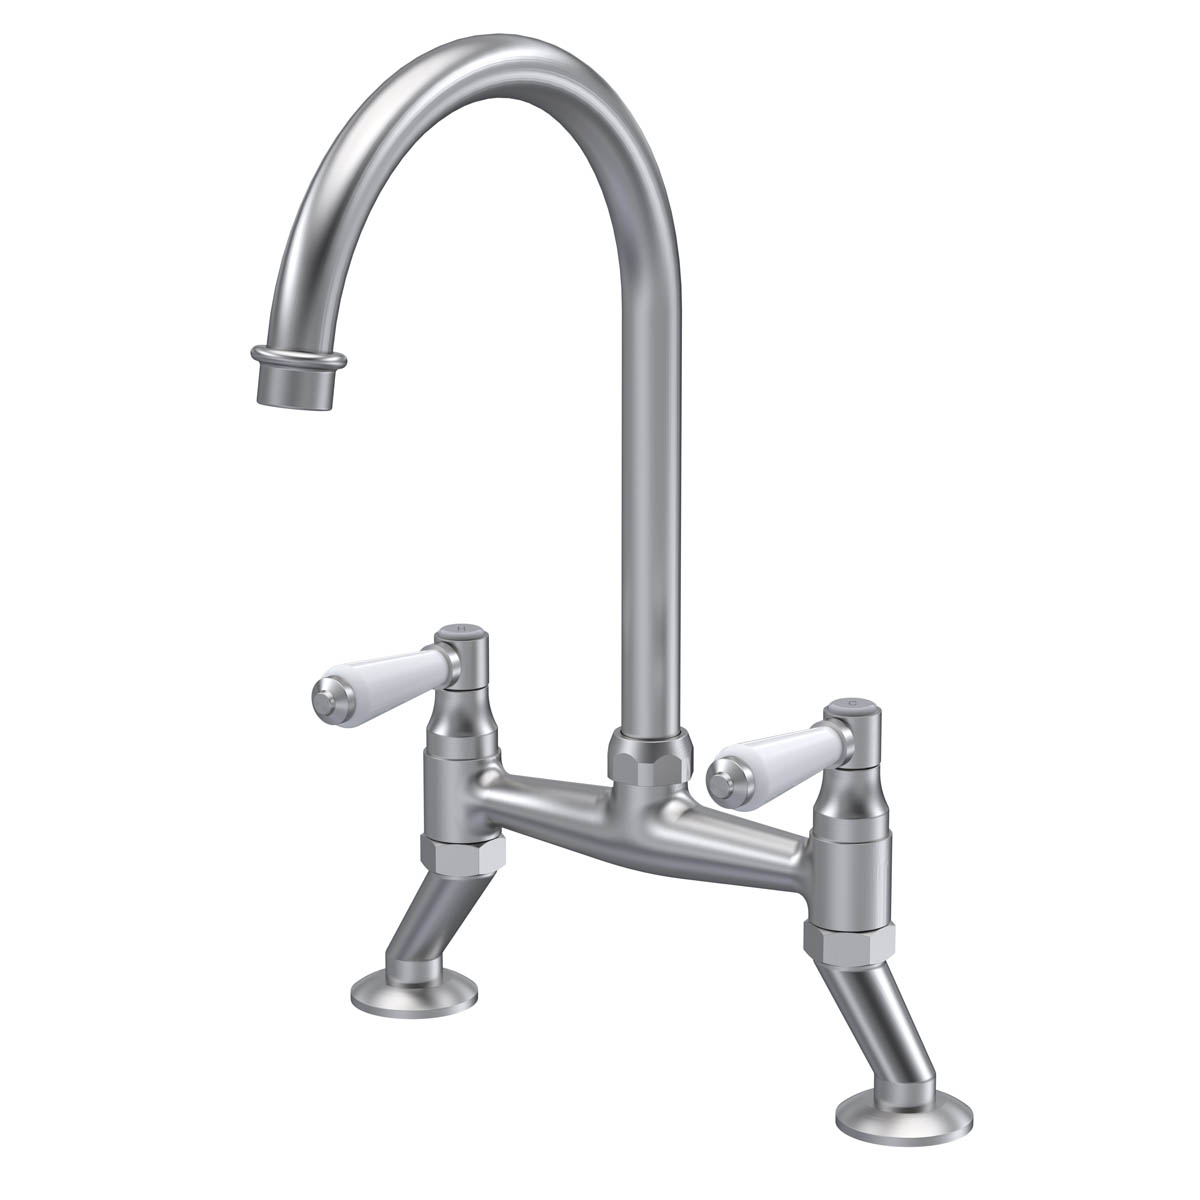 Nuie Bridge Traditional Mono Kitchen Tap with Topaz Lever - Brushed Nickel (20376)